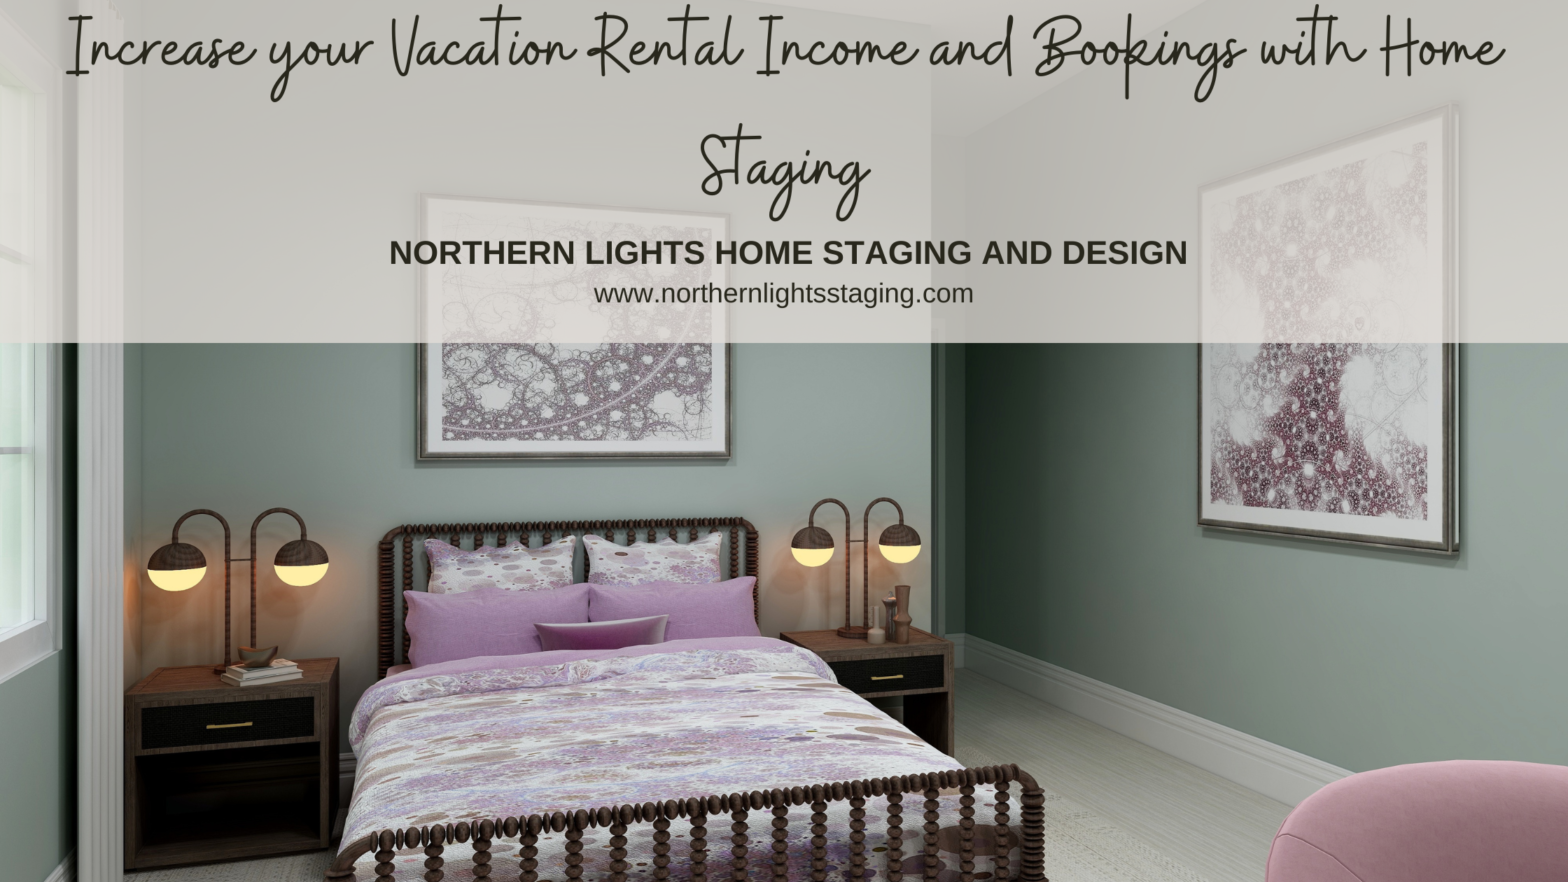 Increase your Vacation Rental Income and Bookings with Home Staging